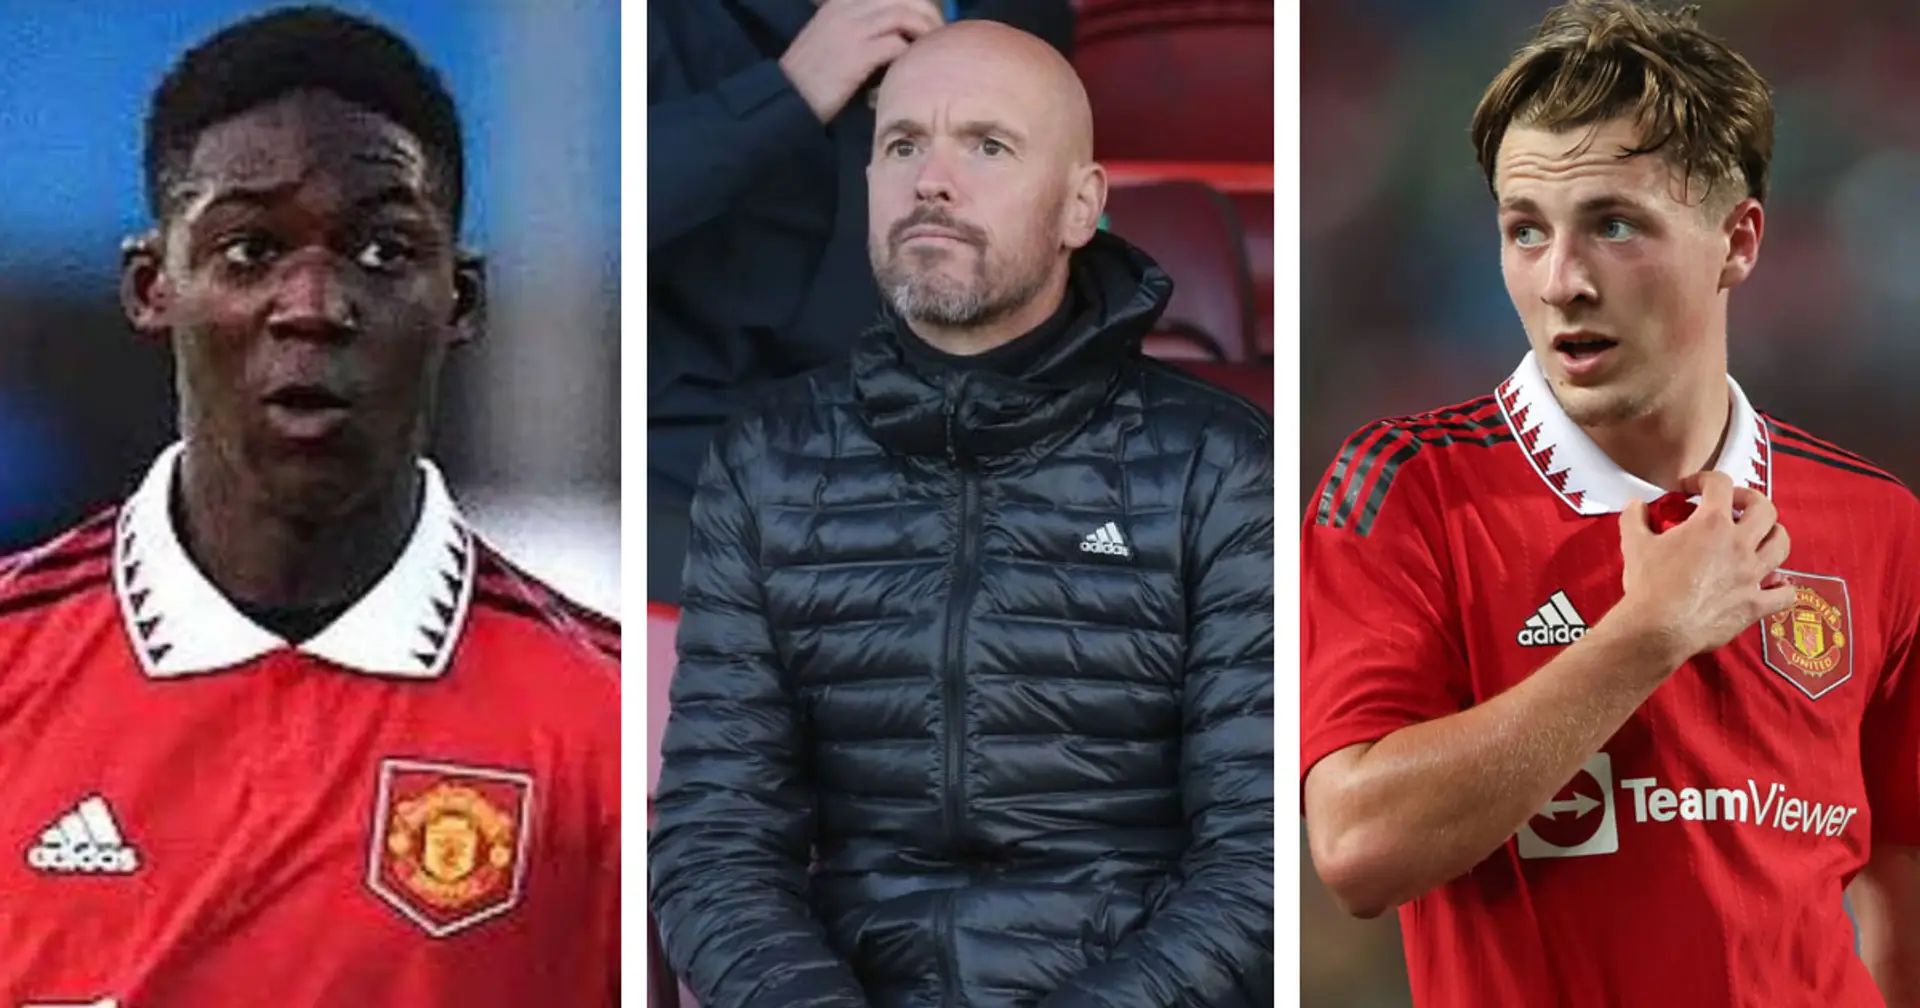 Ten Hag attends Man United U21s game - 4 young players he might've scouted